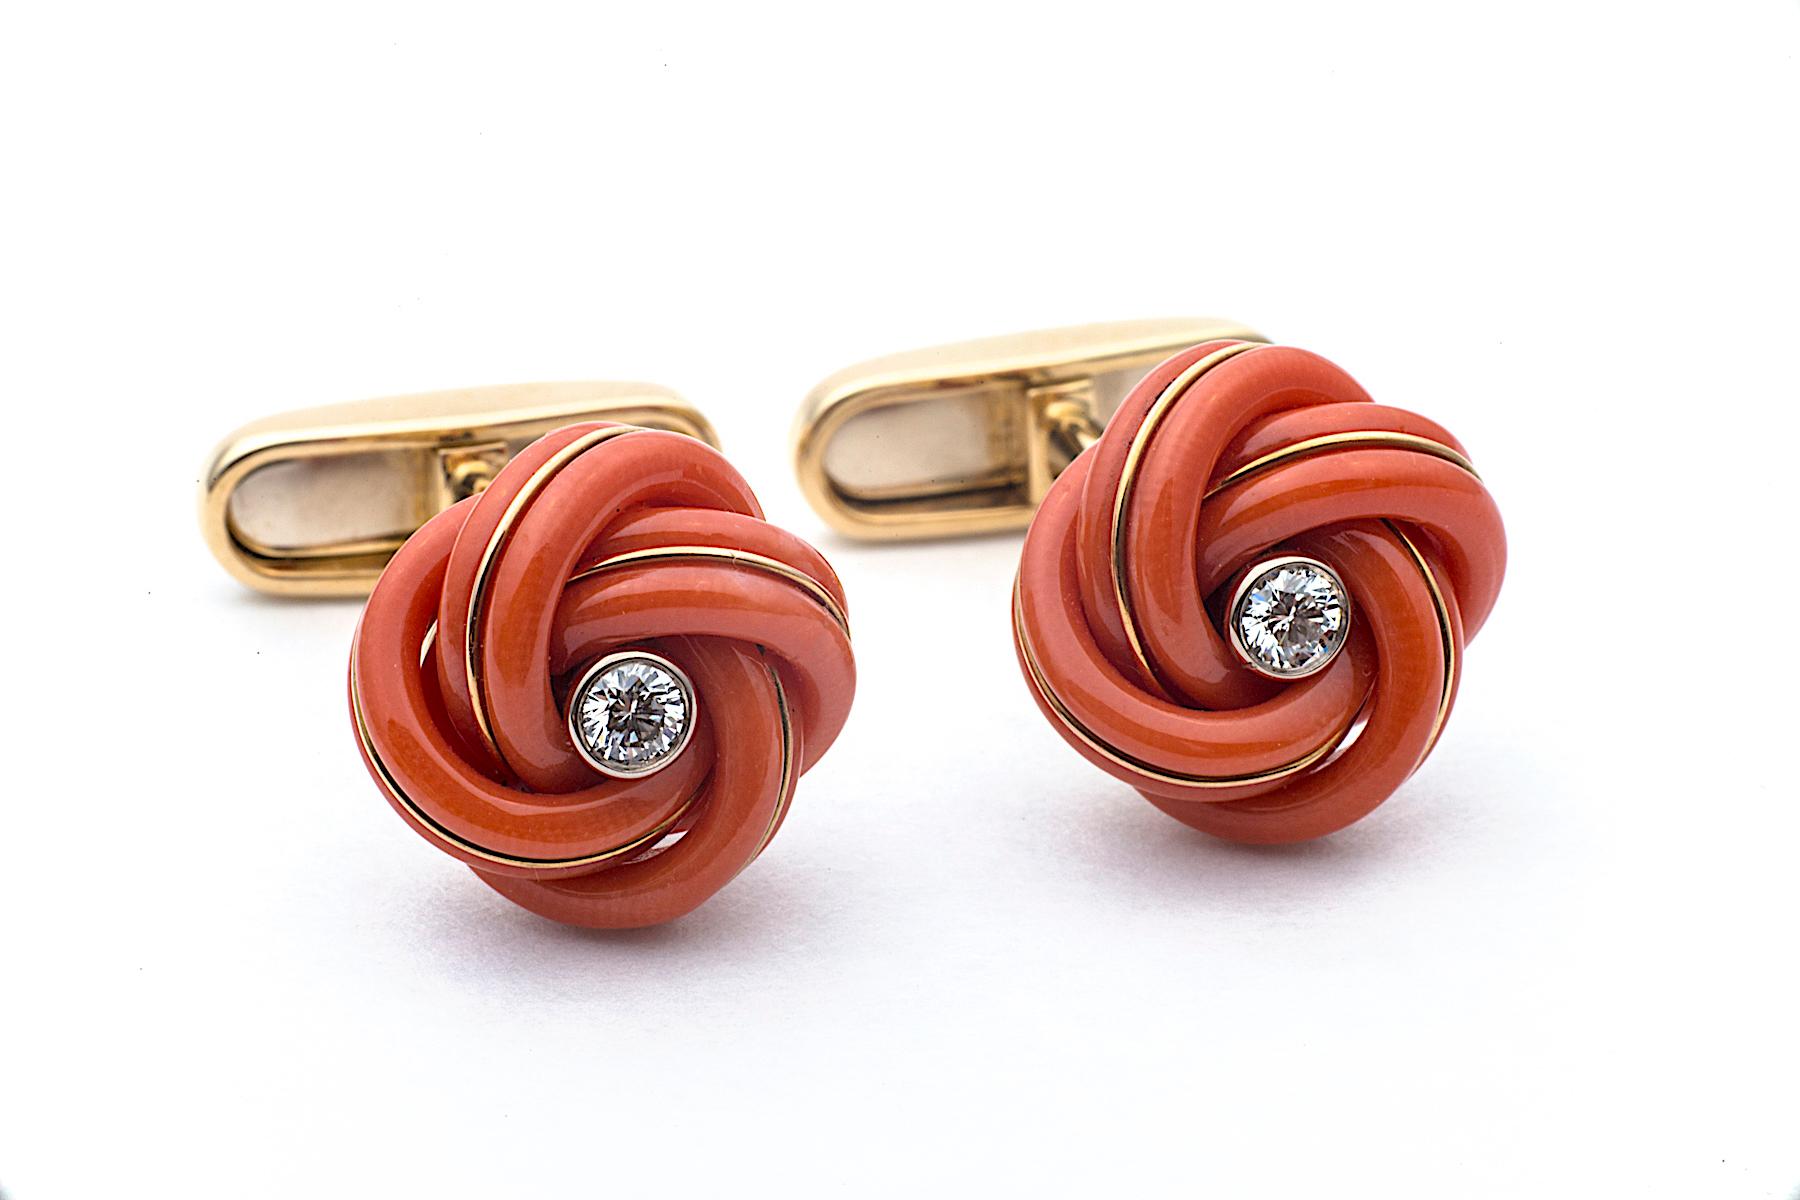 The tertiary color coral is made from the warm colors or red and orange and represents the sun, evoking feelings of both strength and comfort.  And, these hand carved natural coral knot cufflinks are as sizzling as accessories get!  With a bezel set